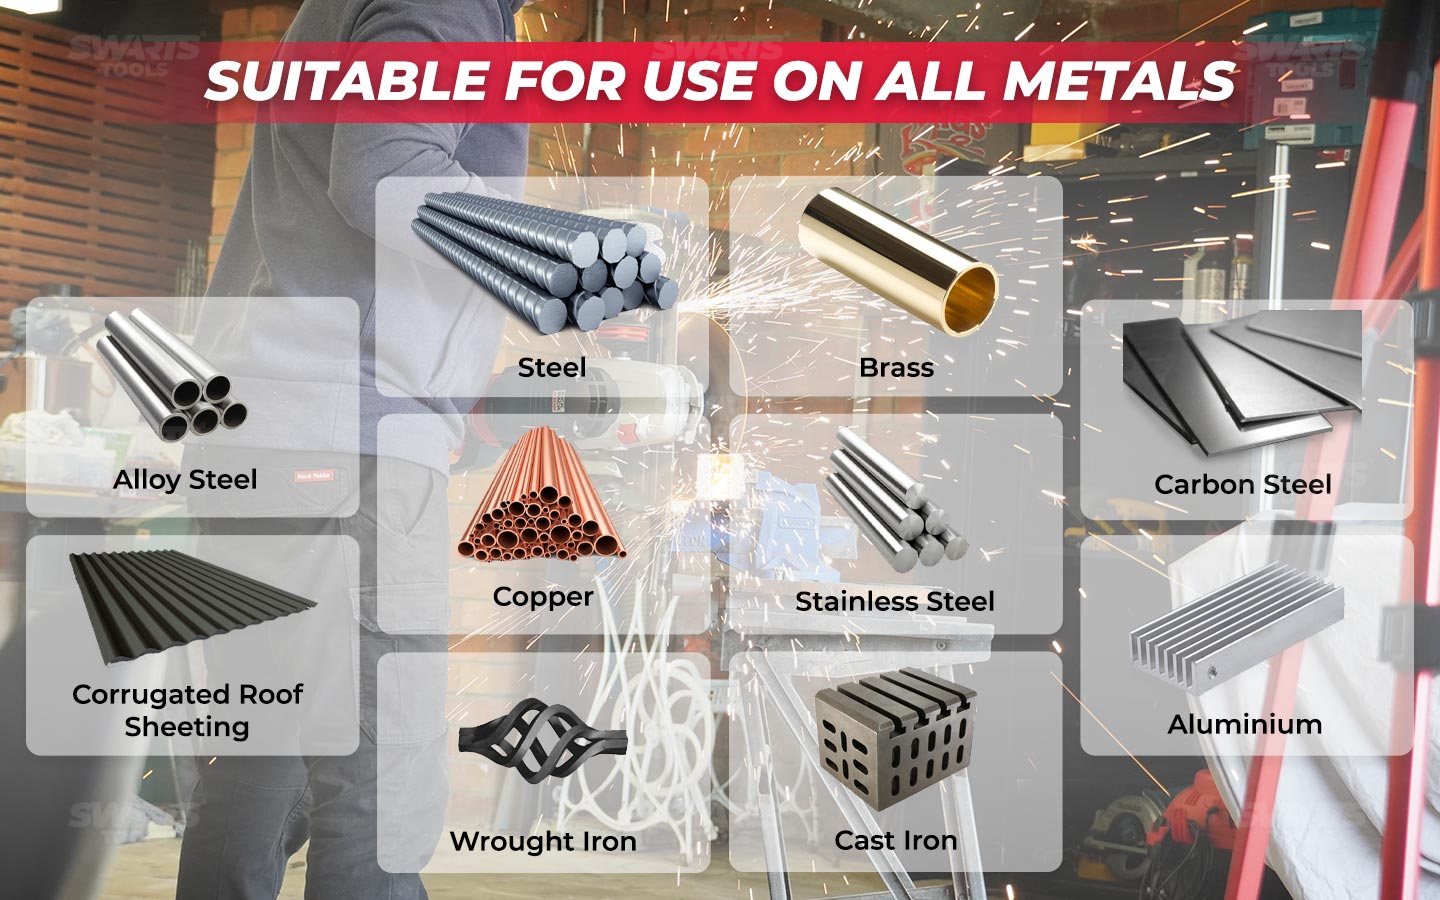 Suitable for use on all metals